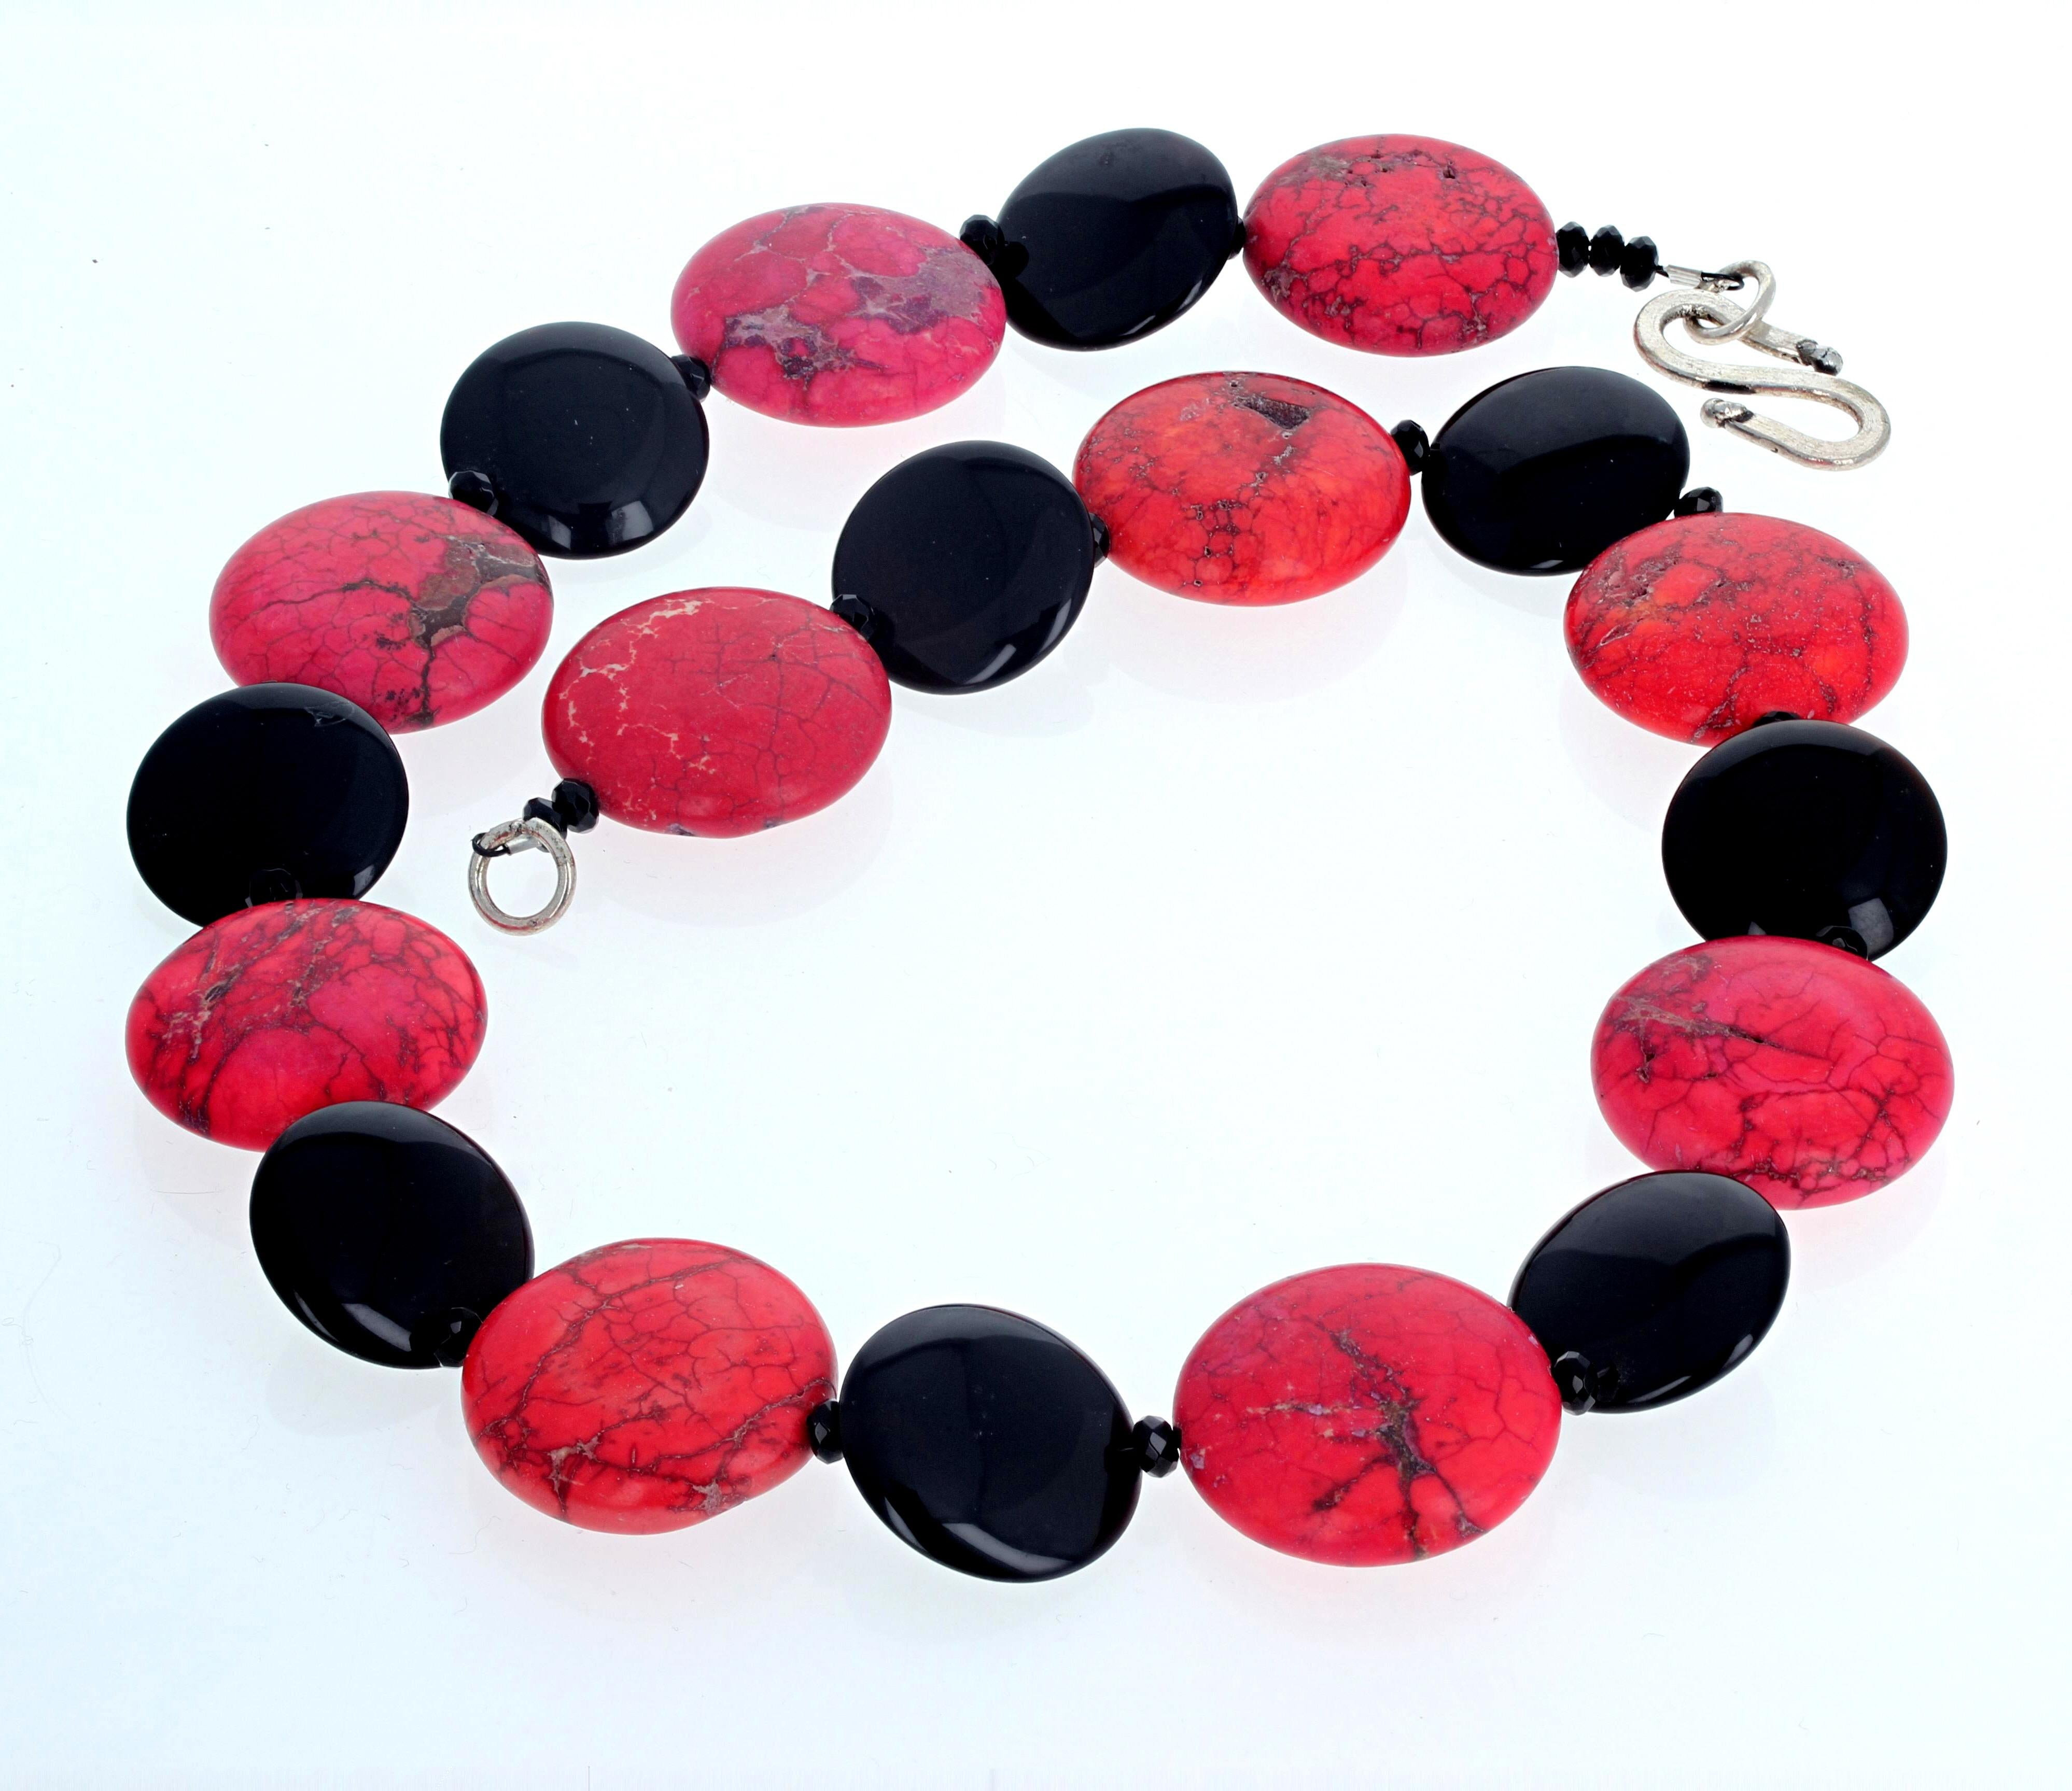 This outstanding statement necklace is 19 1/2 inches long.  The round red natural Howlites are approximately 25mm across and about 8mm thick.  The natural black Onyx are approximately 20mm across and about 5 1/2mm thick.  This is enhanced with